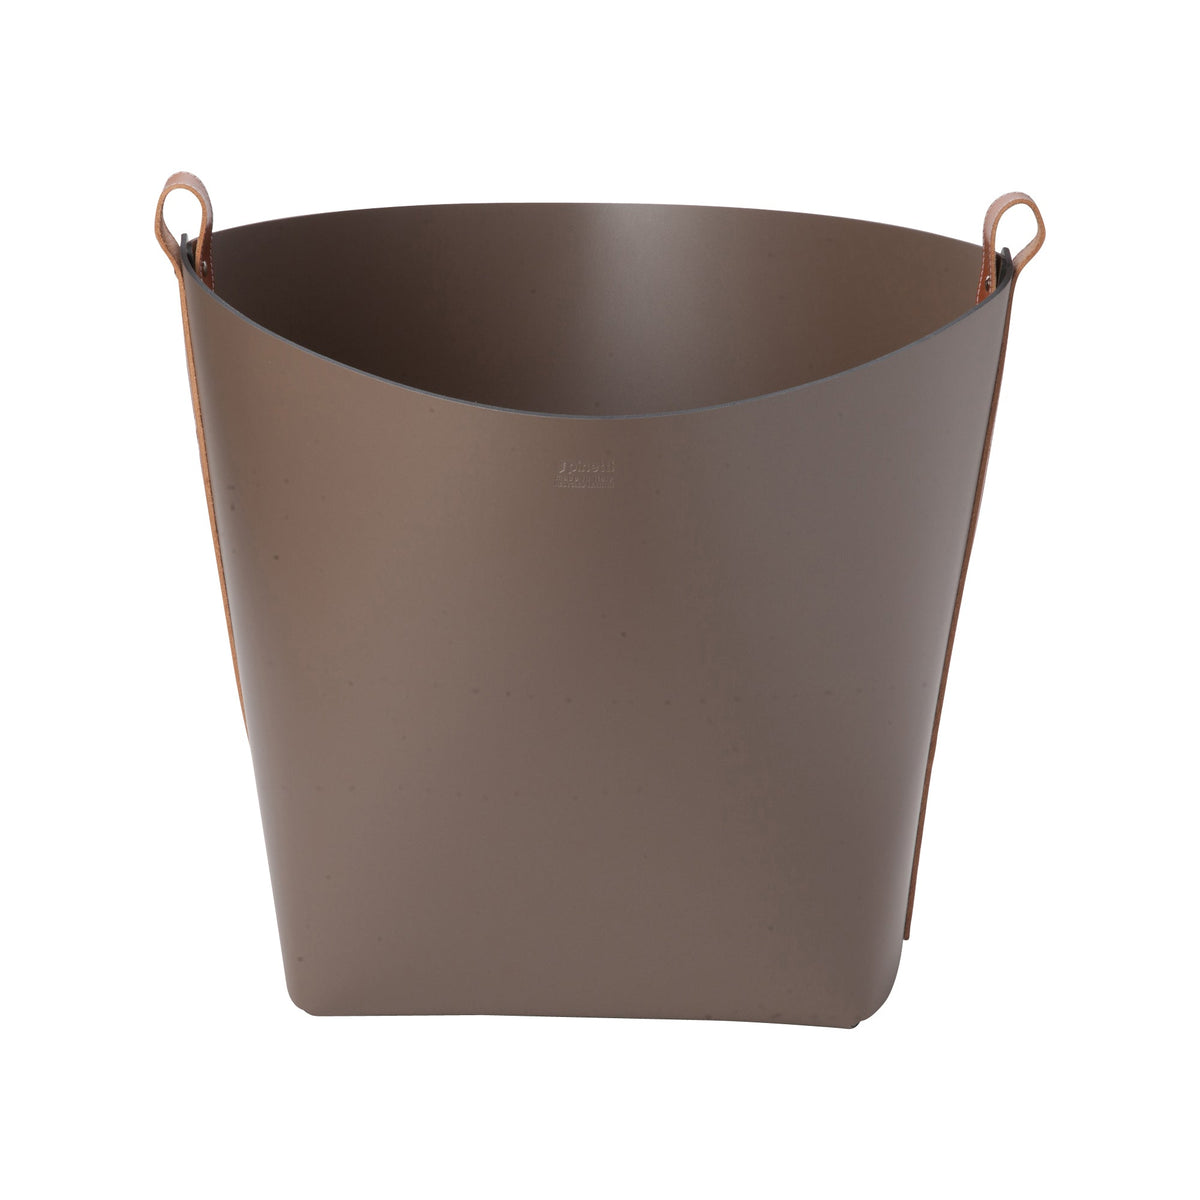 Large Leather Magazine Basket -Taupe with Brown Strap